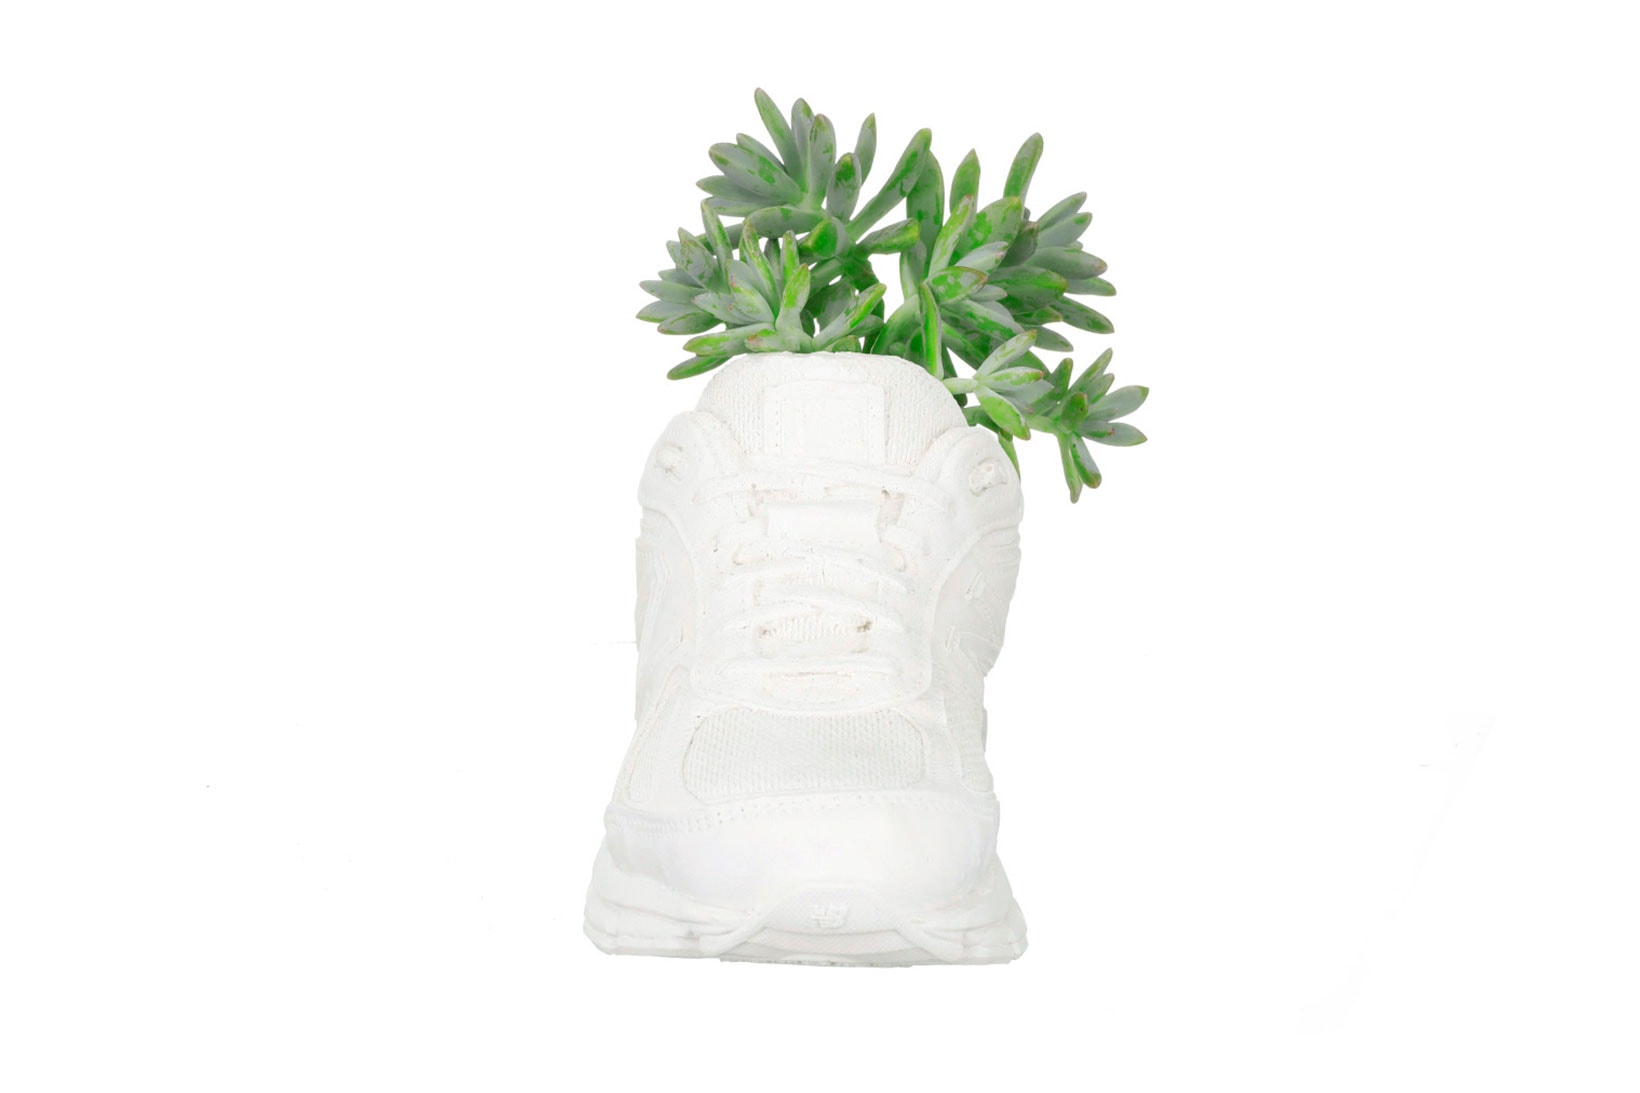 Hydroflora's New Balance 990v4 Sneaker Planter front view